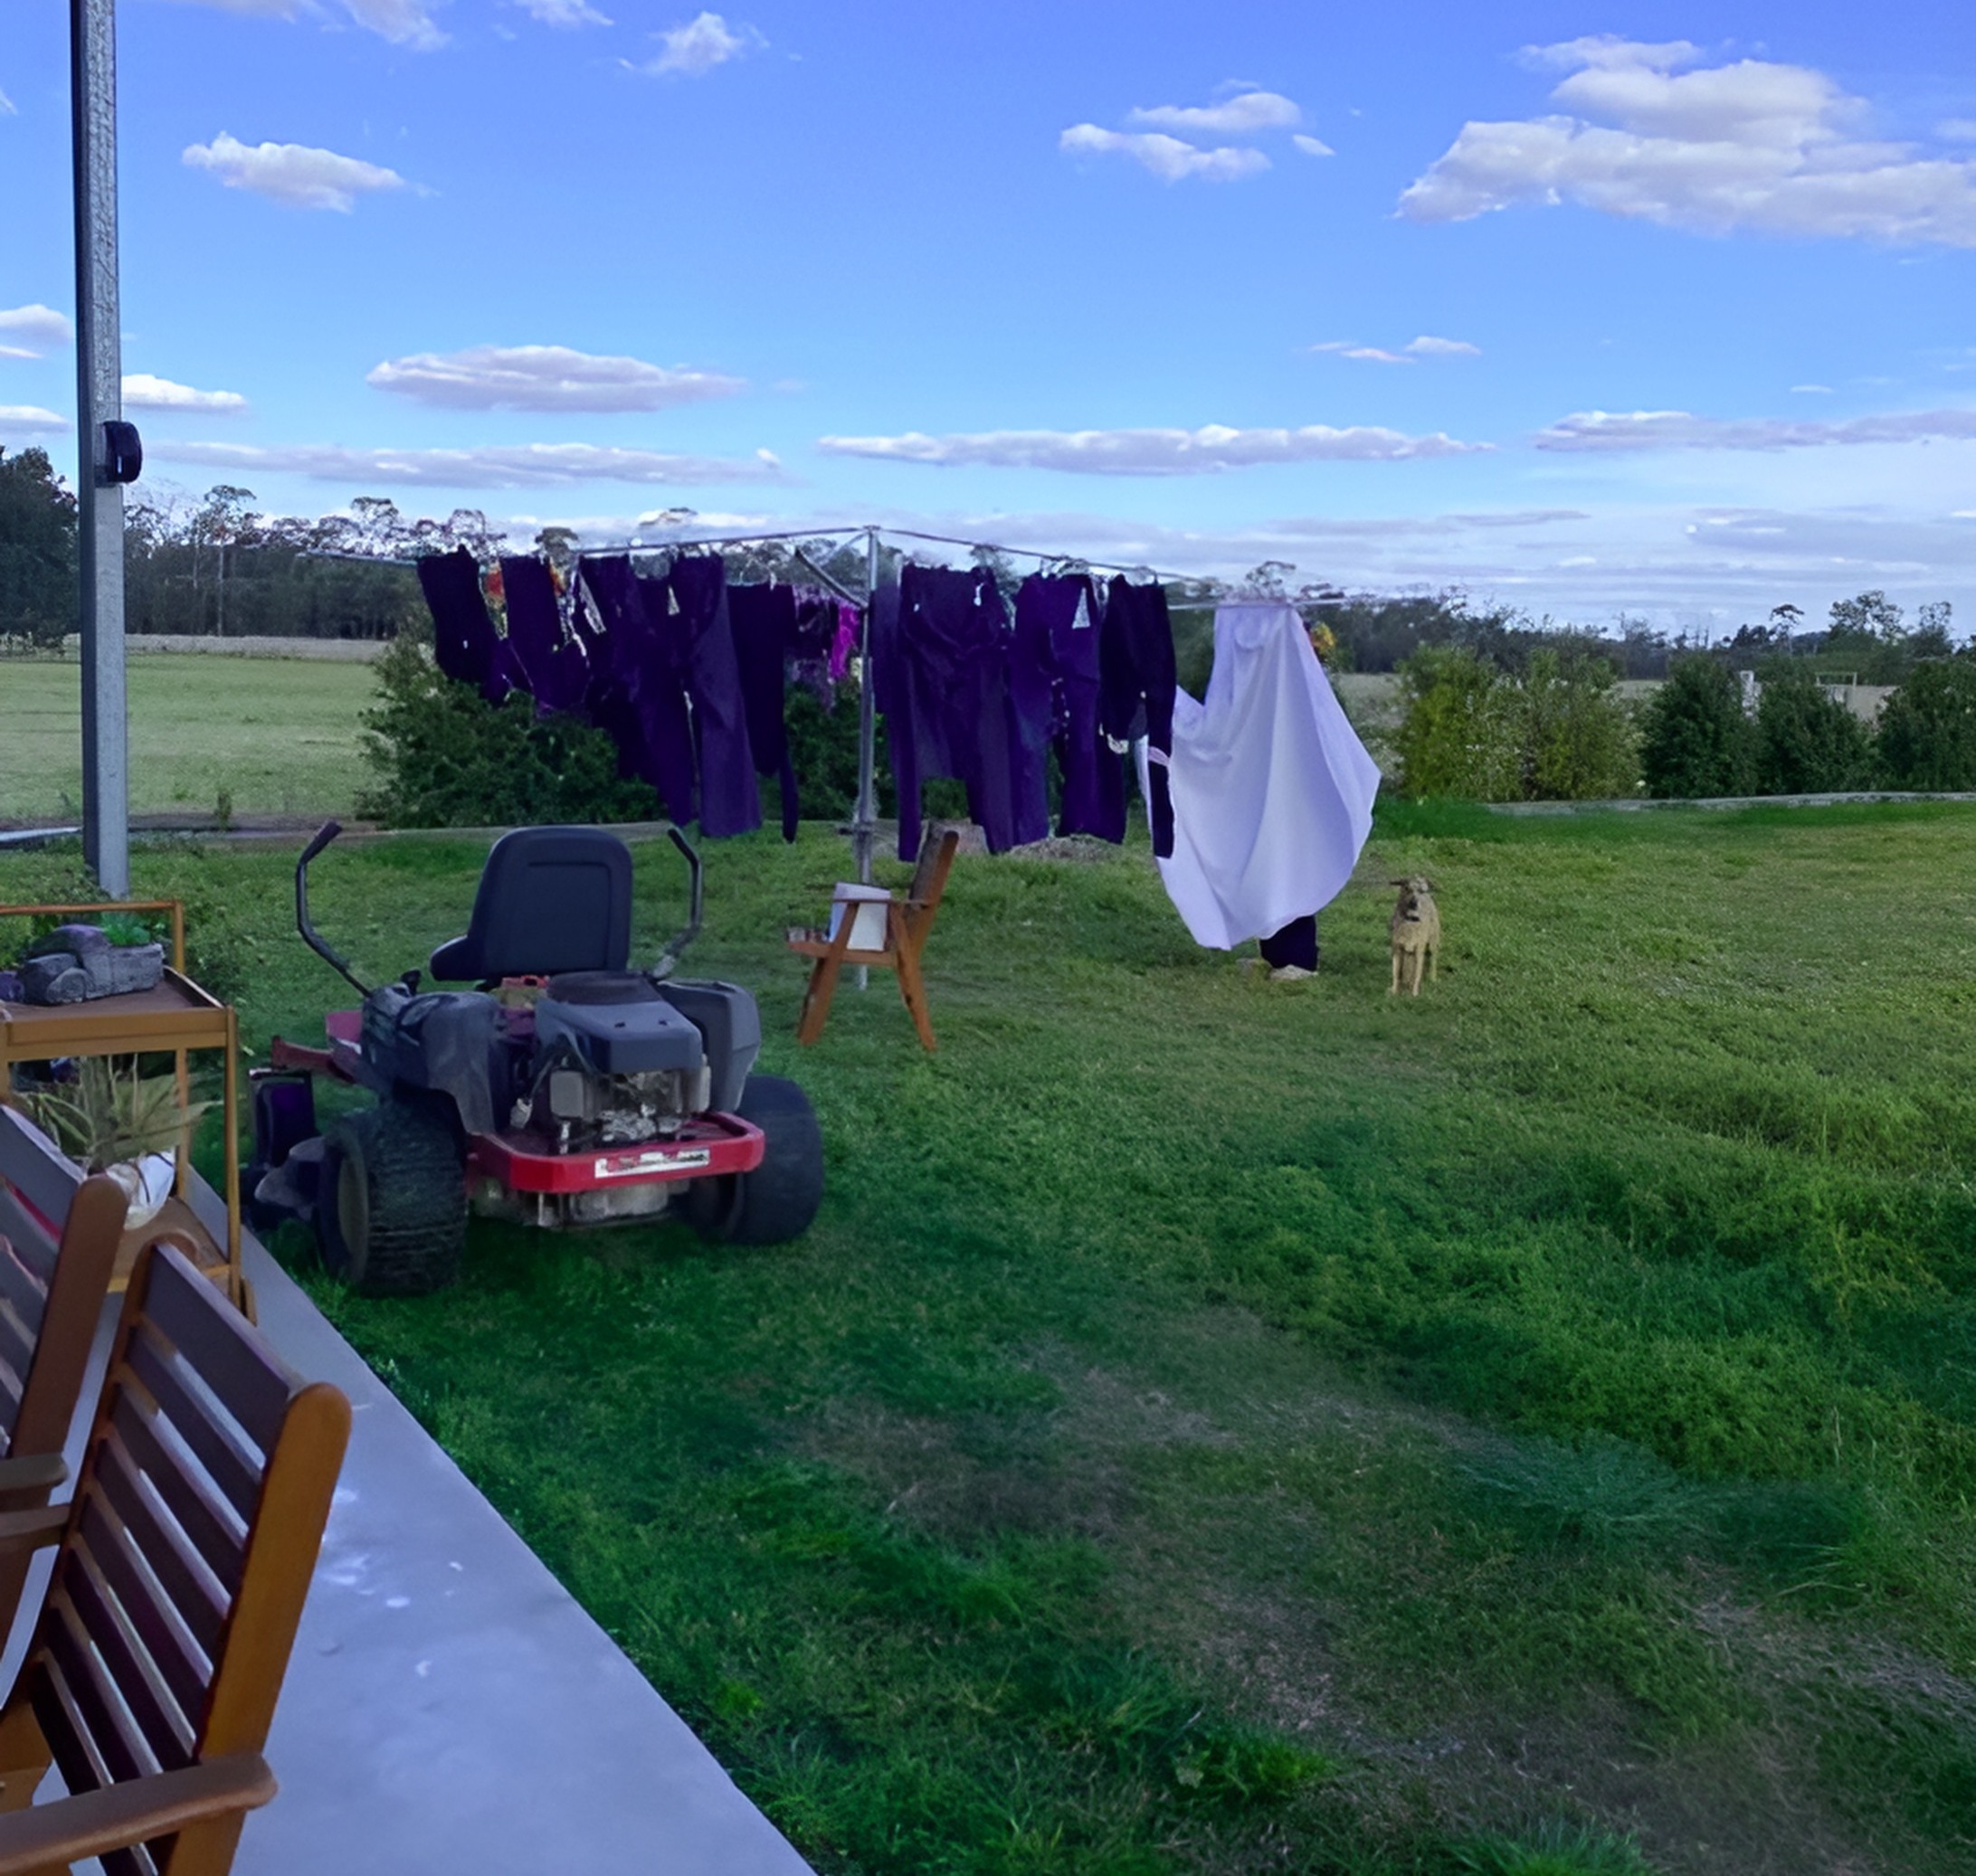 Rotary Clothesline for a Family of 5 9. Perfectly Suited for the Australian Backyard